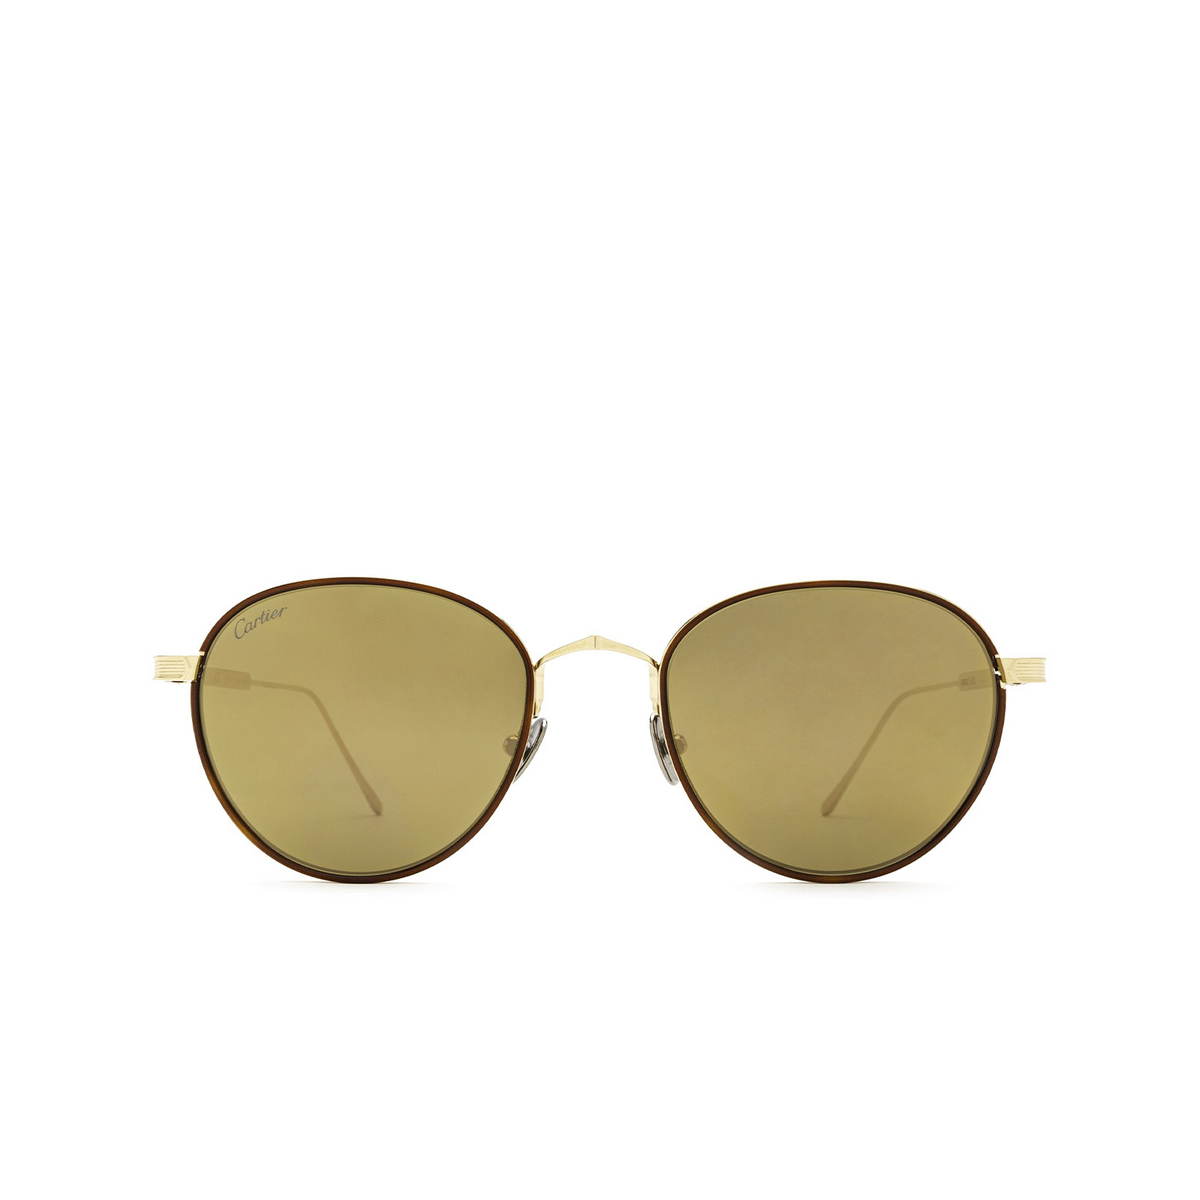 Cartier® Round Sunglasses: CT0250S color Gold 008 - front view.